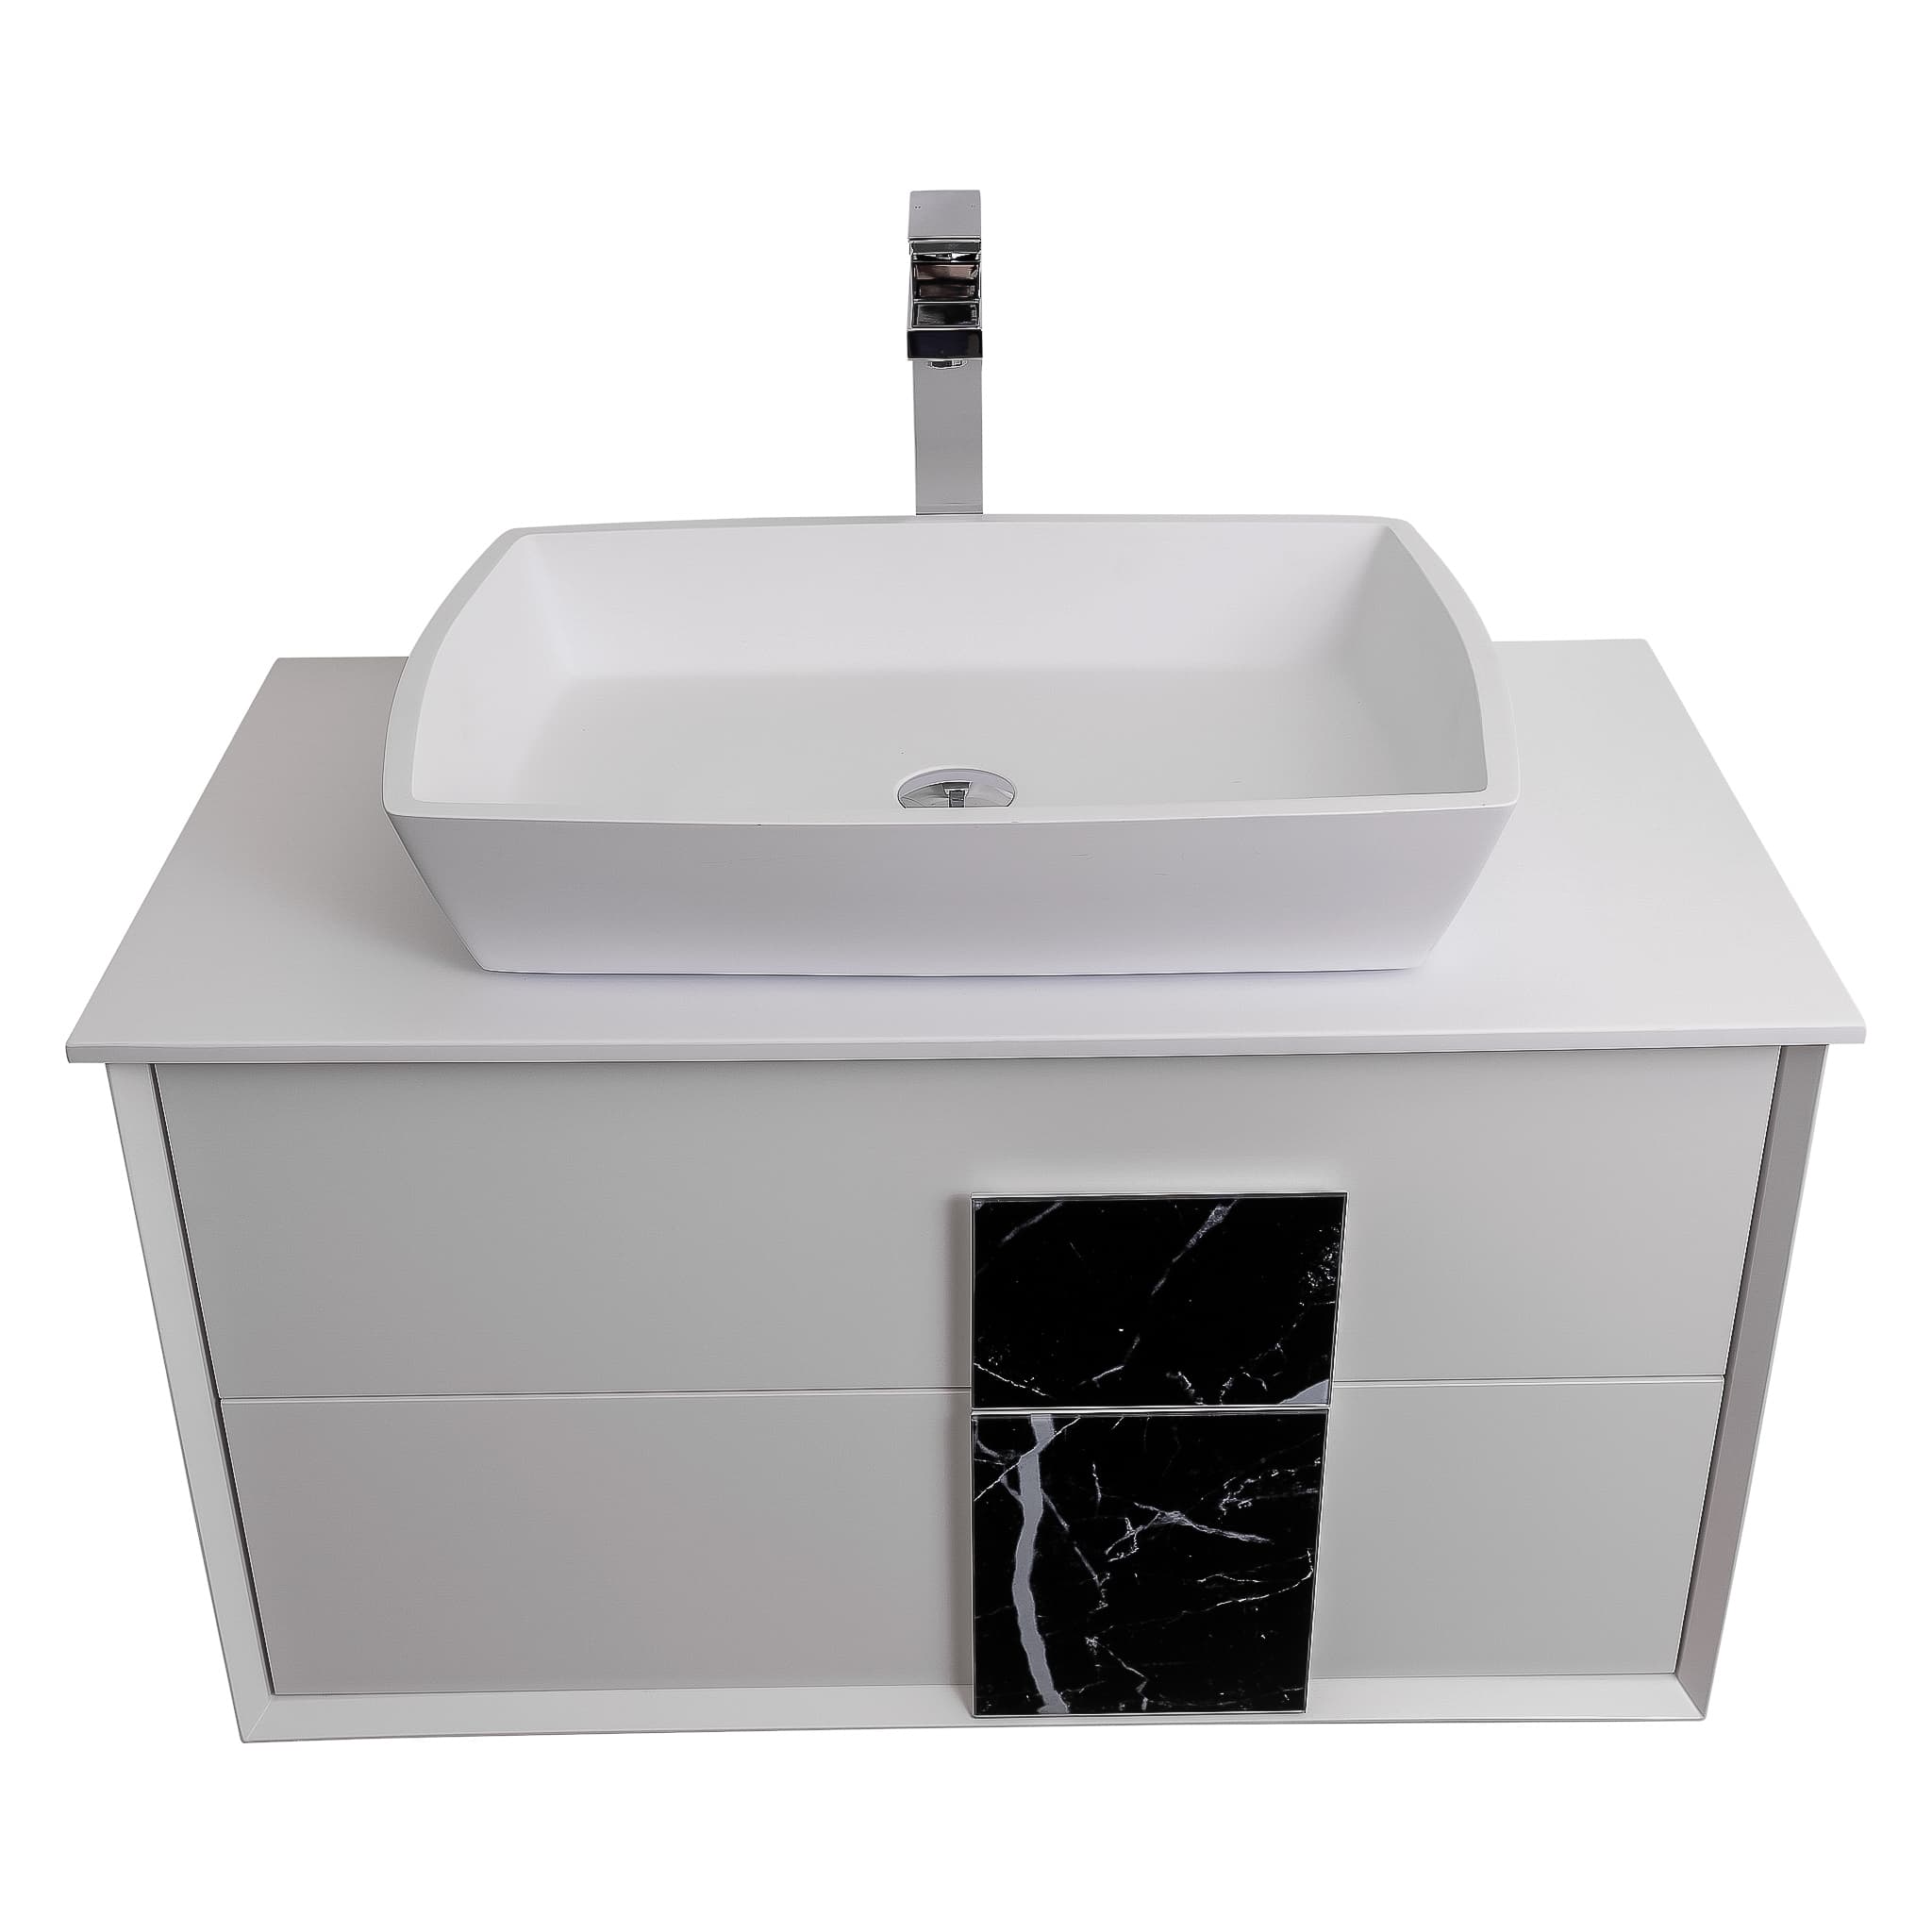 Piazza 31.5 Matte White With Black Marble Handle Cabinet, Solid Surface Flat White Counter and Square Solid Surface White Basin 1316, Wall Mounted Modern Vanity Set